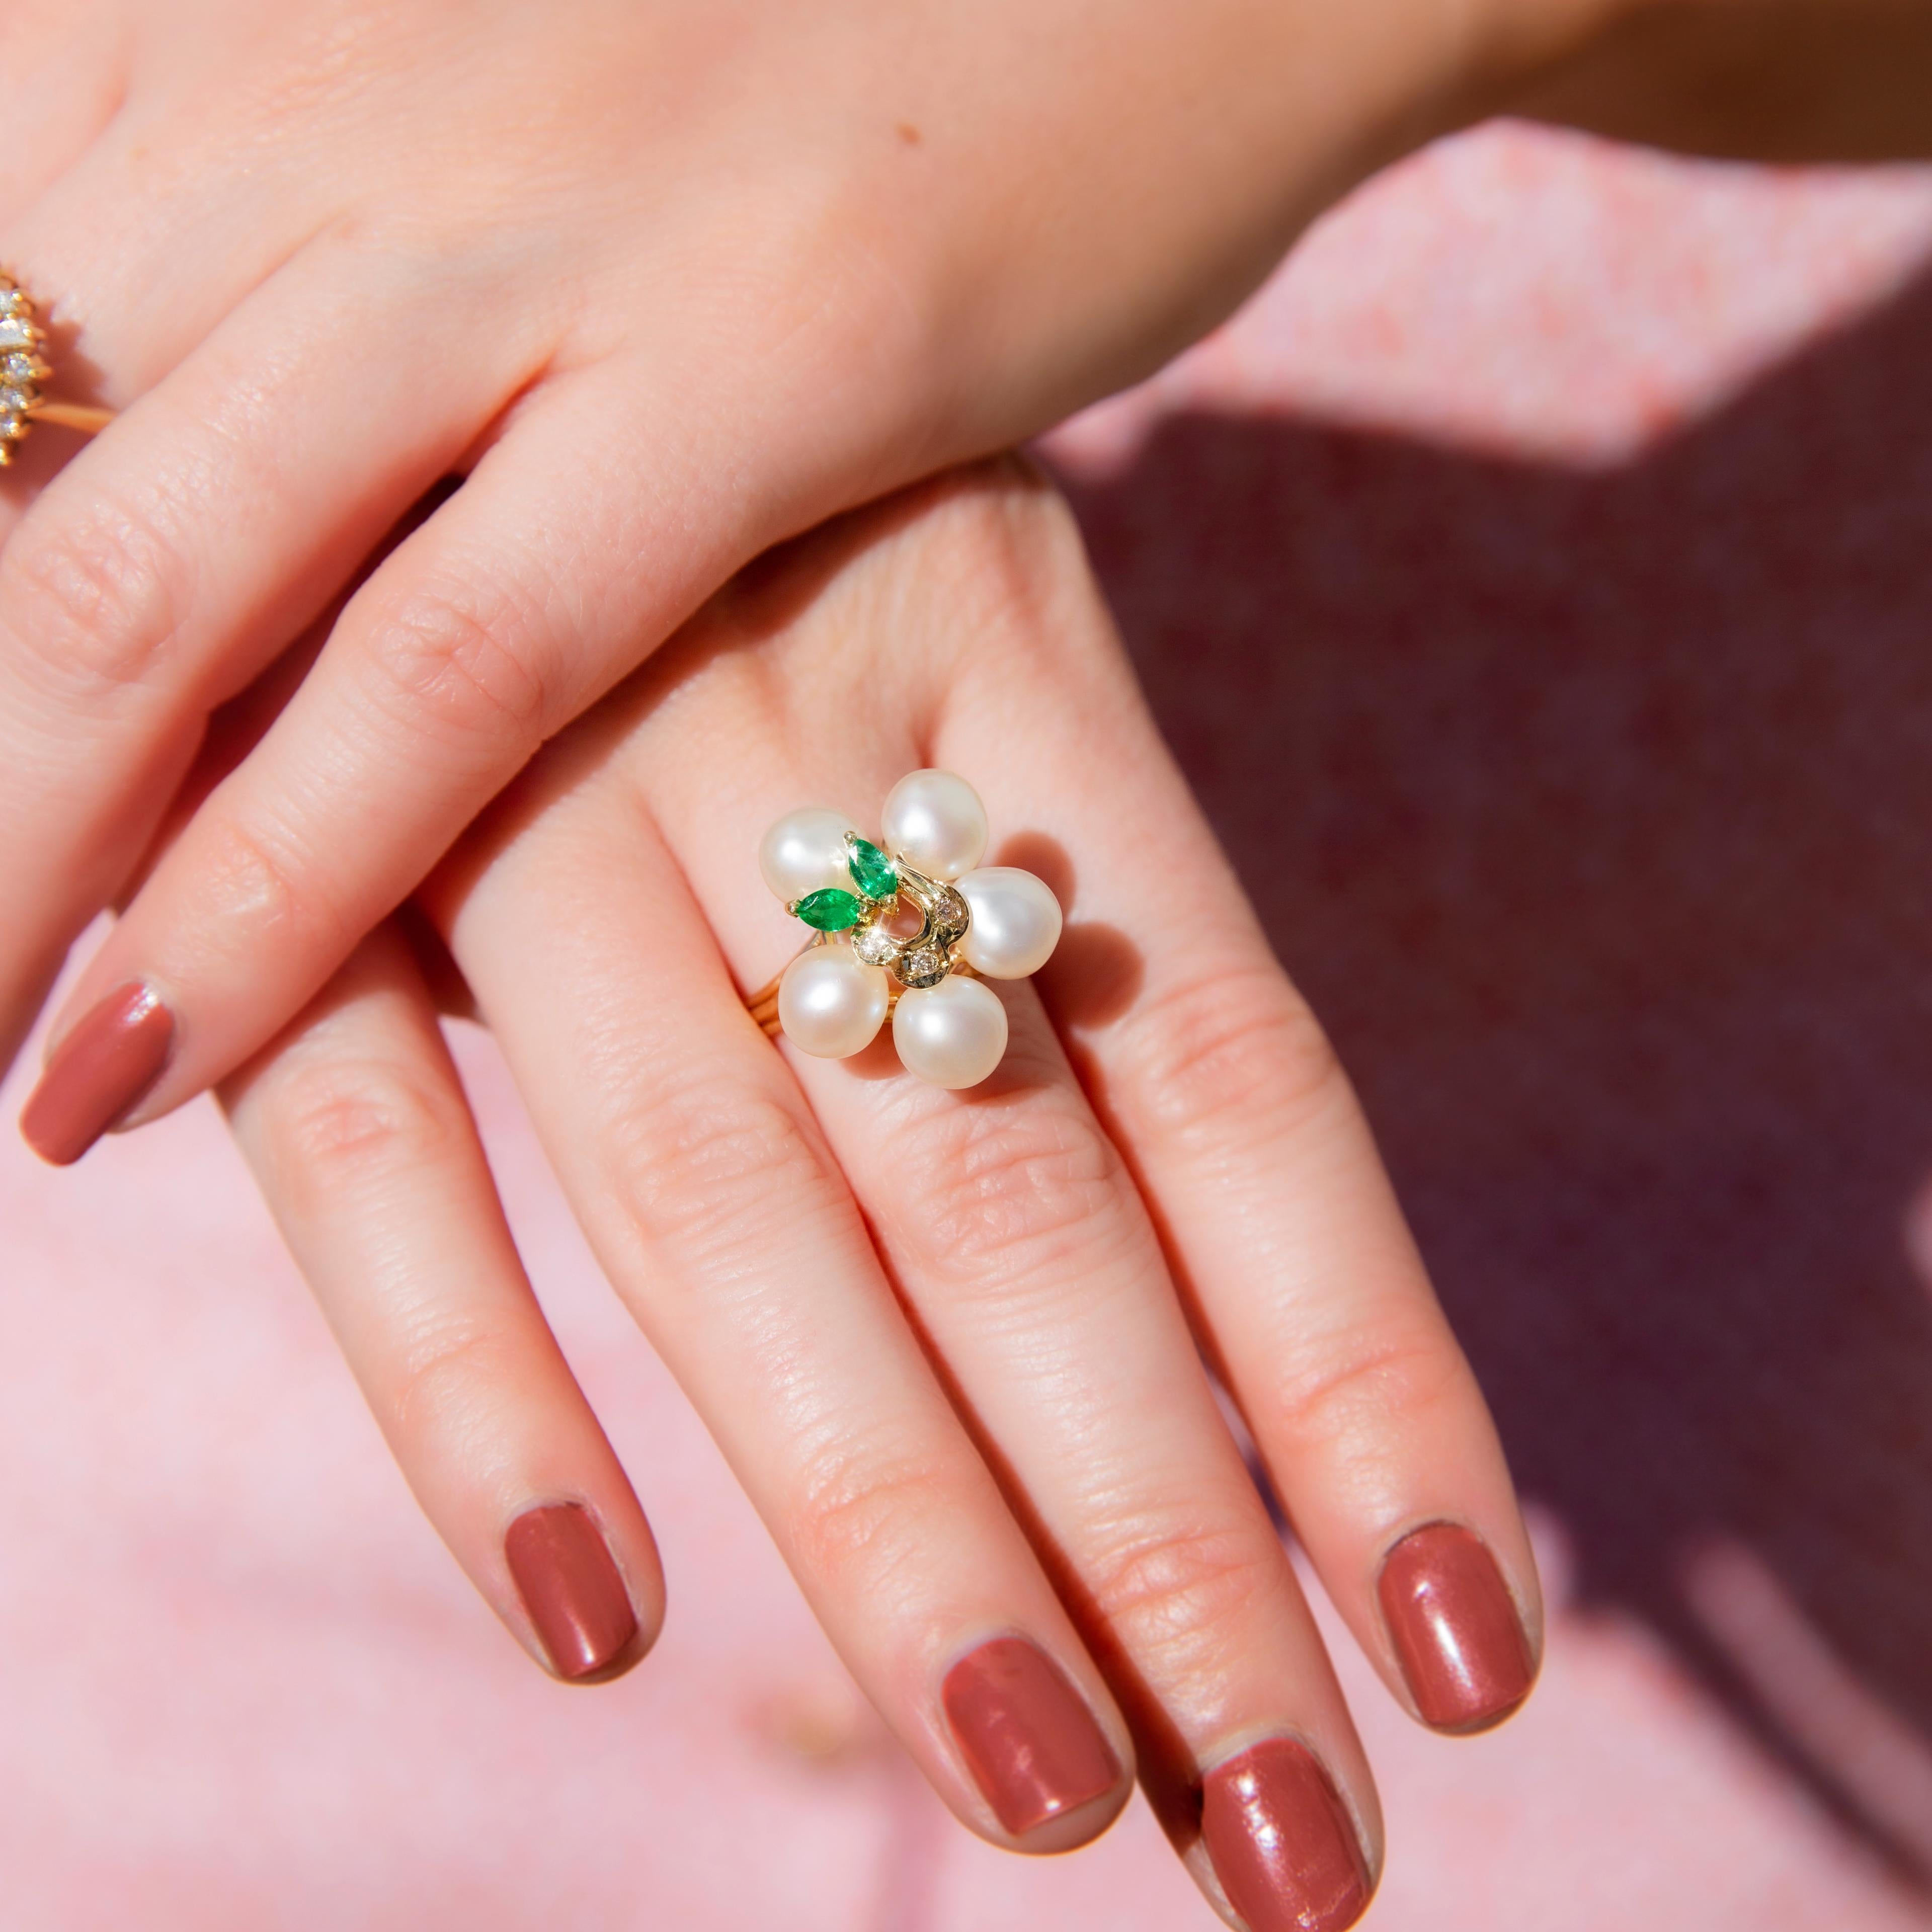 Crafted with love and affection in 12 carat yellow gold, this lovely contemporary ring features an elegant flower cluster of three central round brilliant cut diamonds, two offset marquise cut deep green emeralds and five gorgeous surrounding